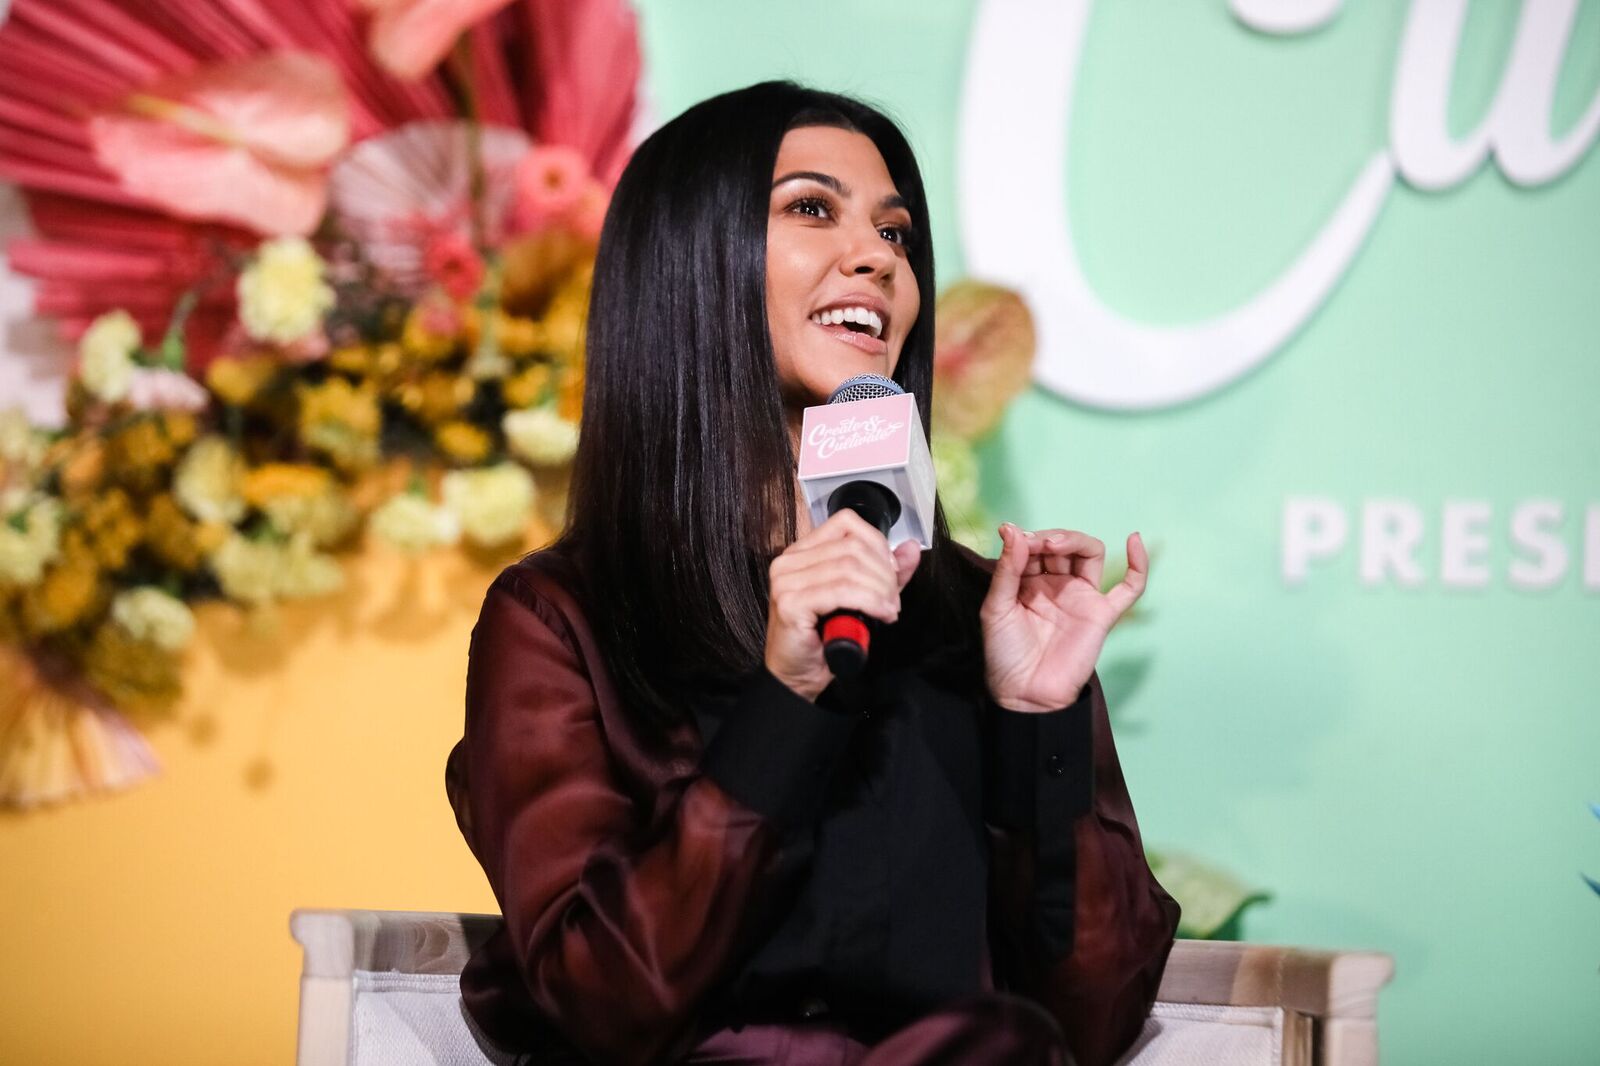 Kourtney Kardashian speaks onstage at the Create & Cultivate Conference held at SVN West on September 21, 2019, in San Francisco, California | Photo: Kelly Sullivan/Getty Images